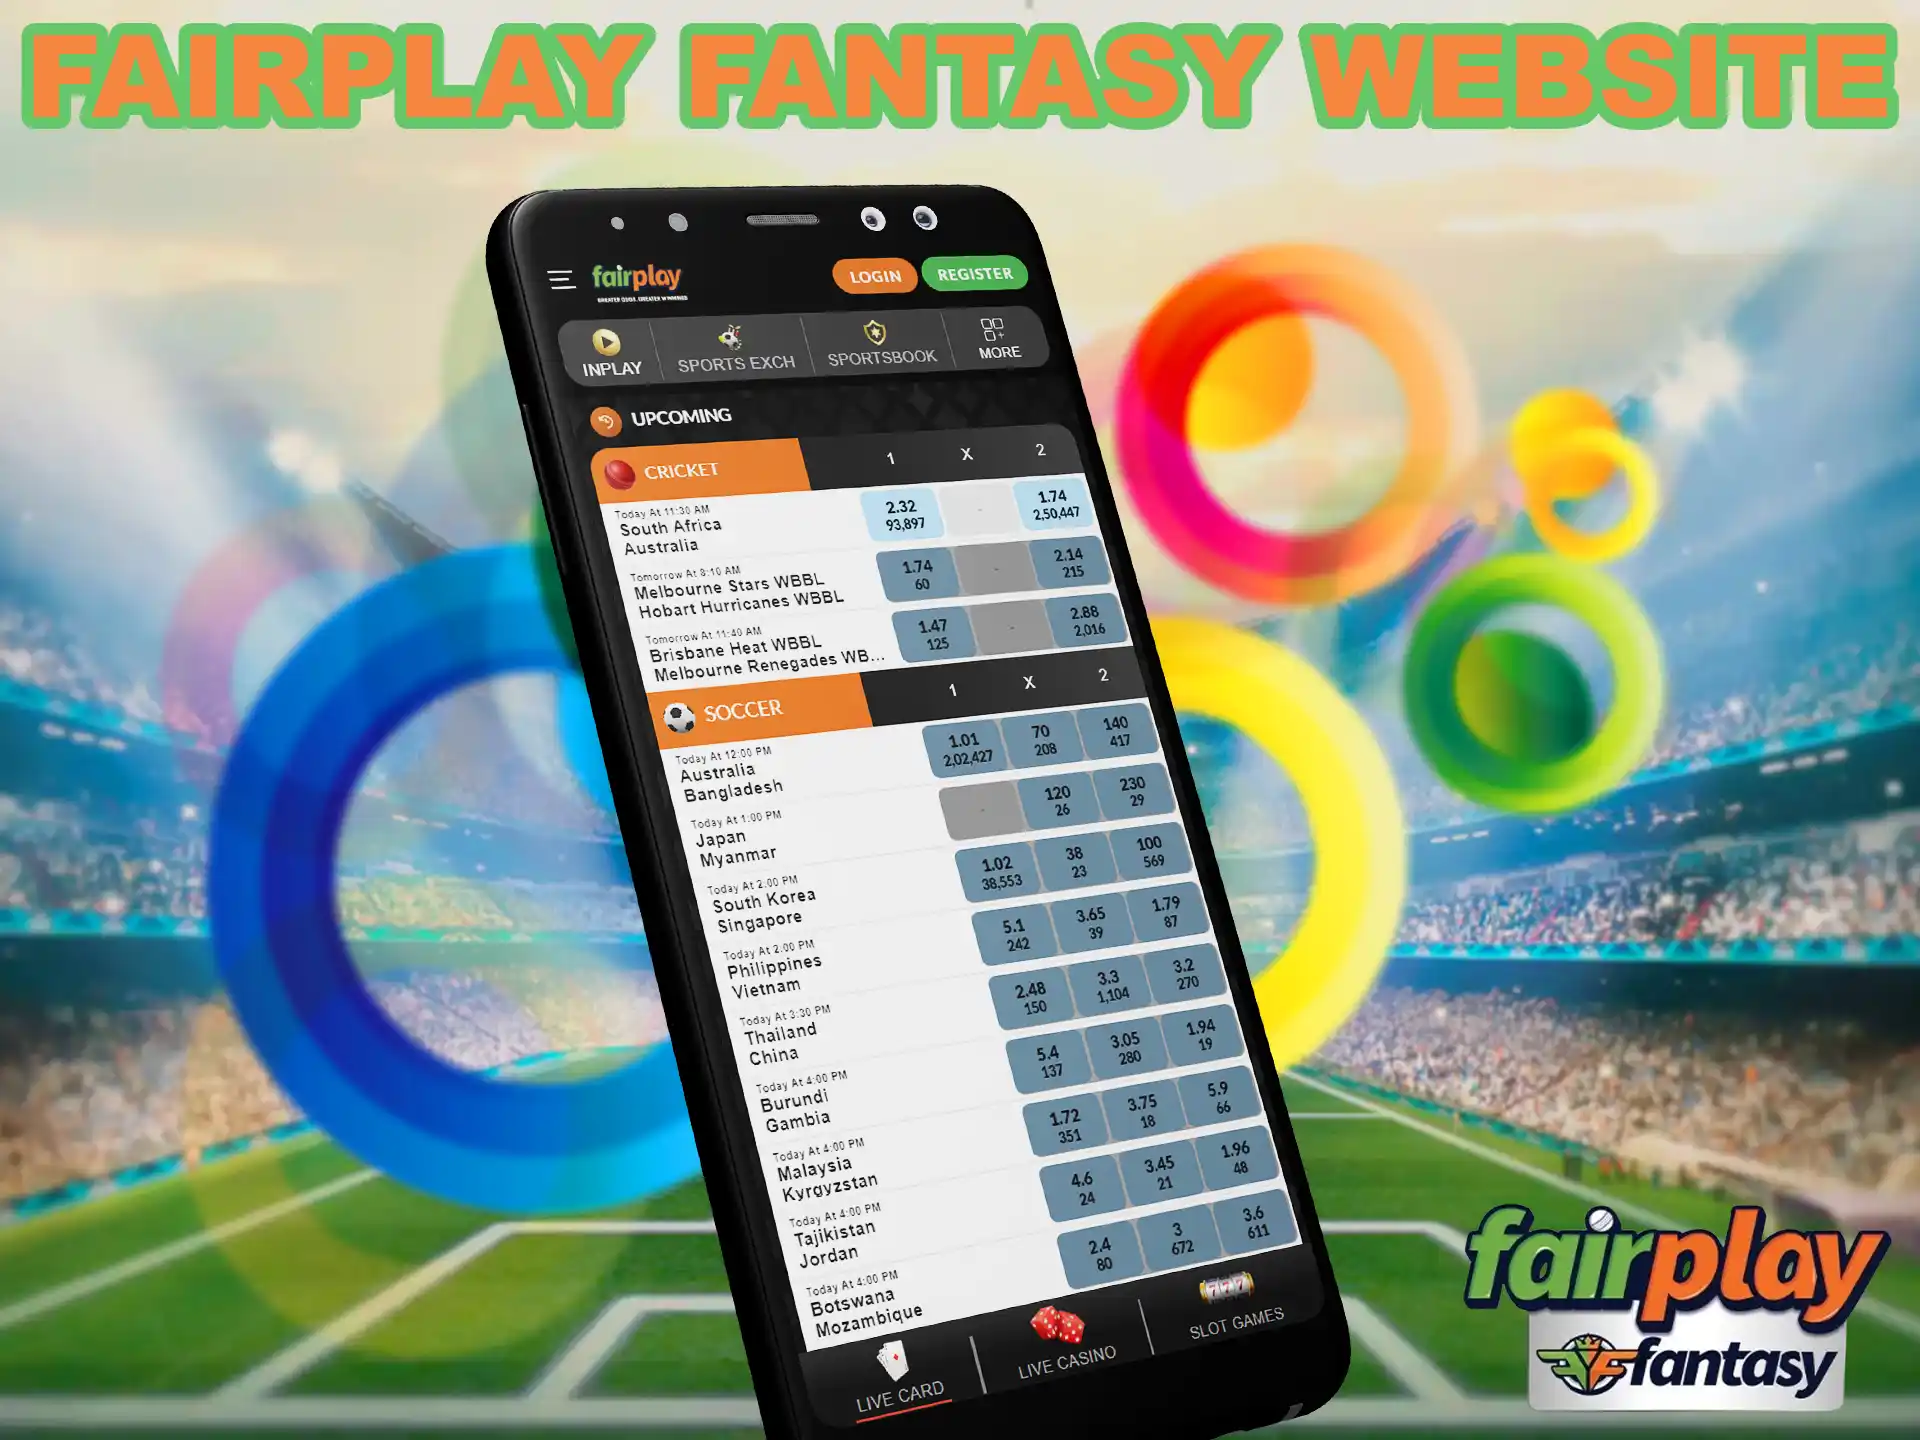 The mobile version of the Fairplay Fantasy site offers players all the same features and benefits as on the desktop site.